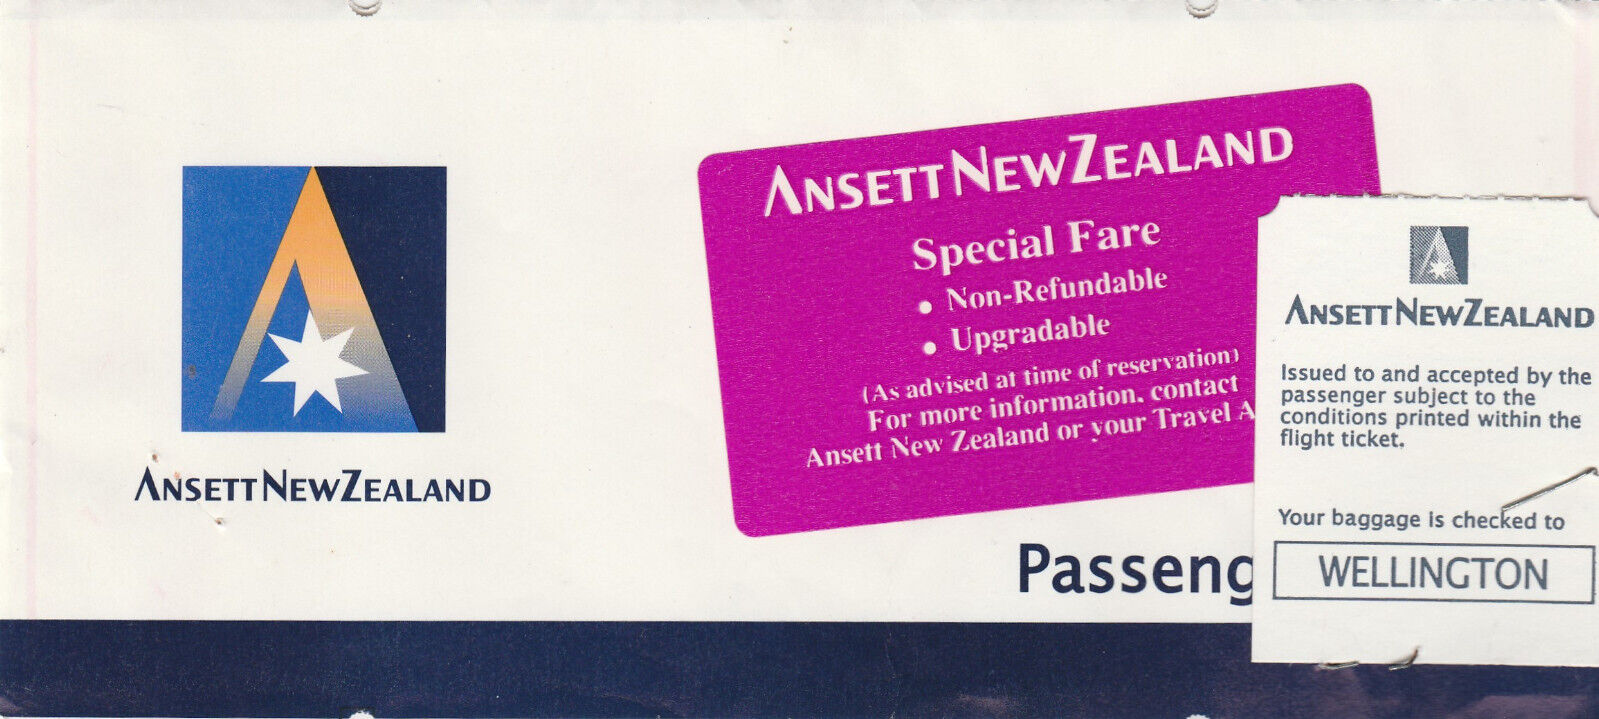 Ansett New Zealand airline domestic passenger ticket & baggage check